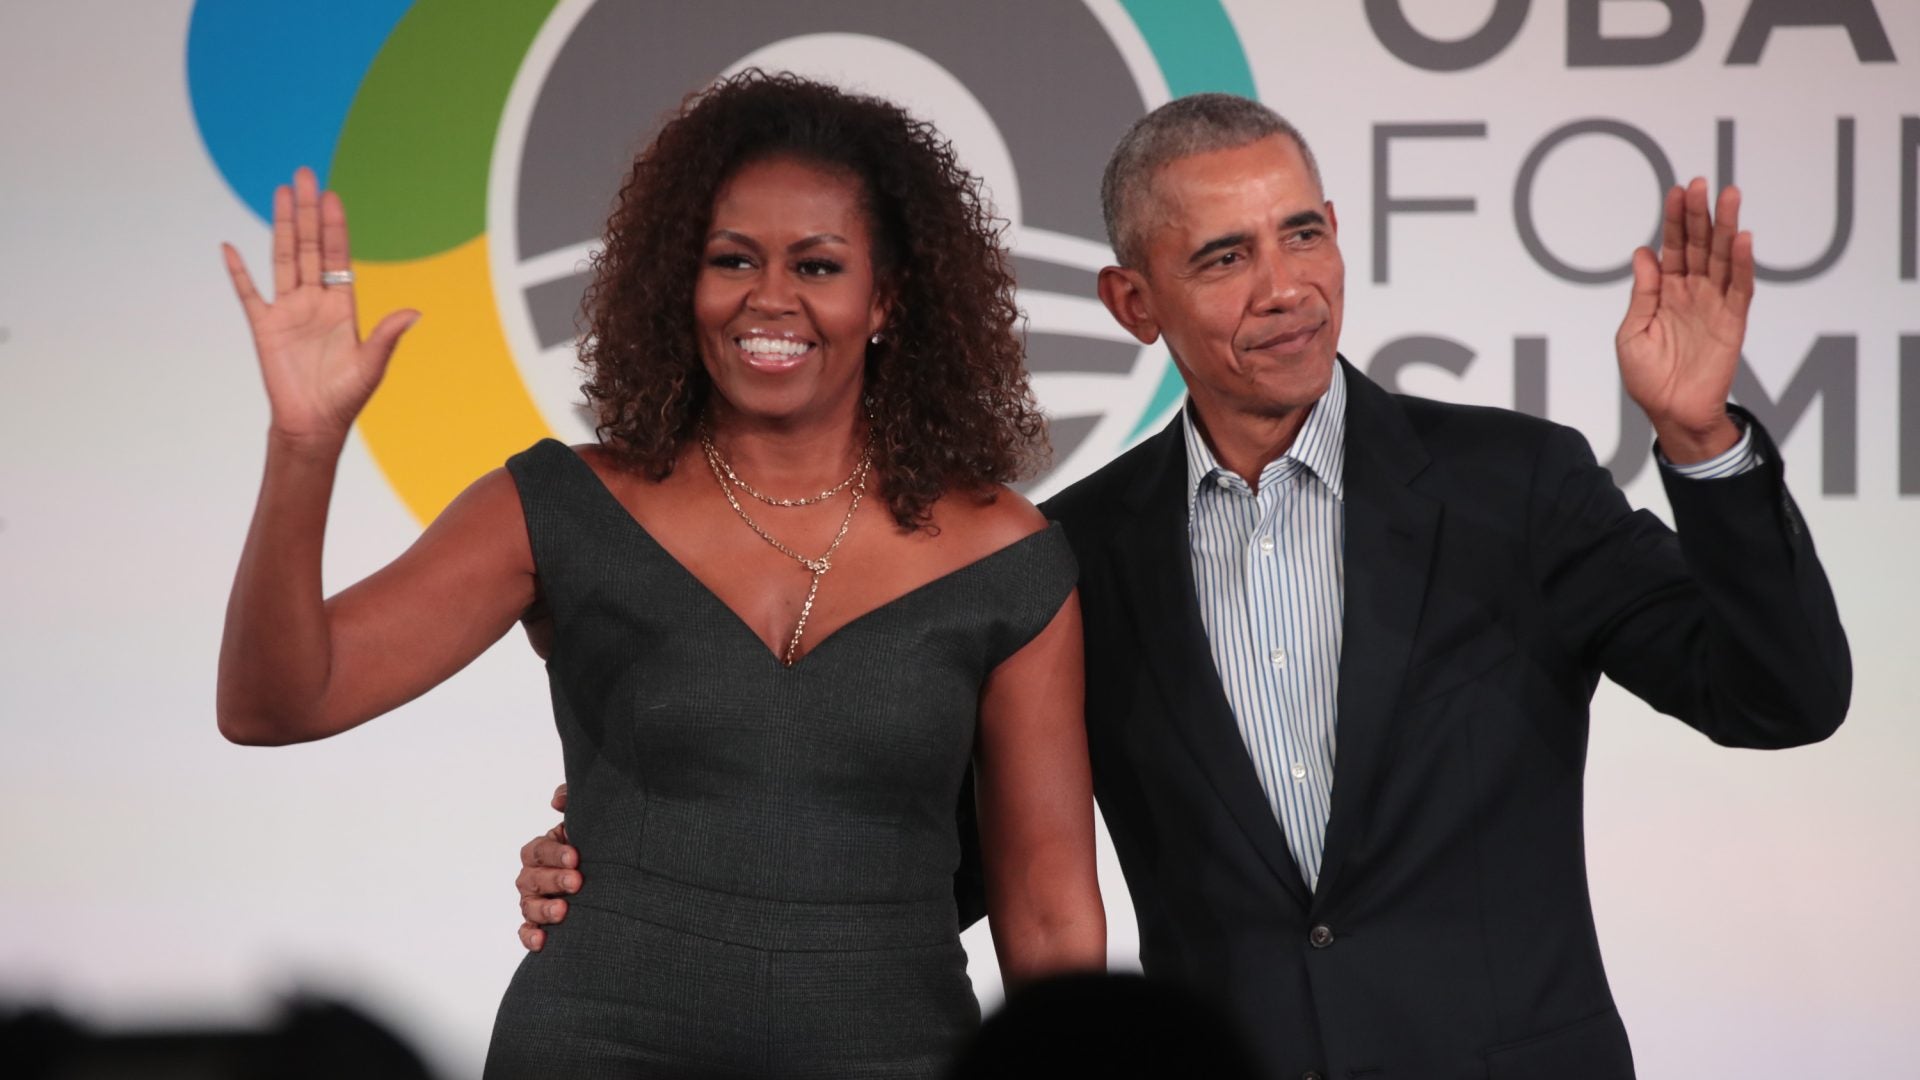 Barack and Michelle Obama To End Podcast Deal With Spotify